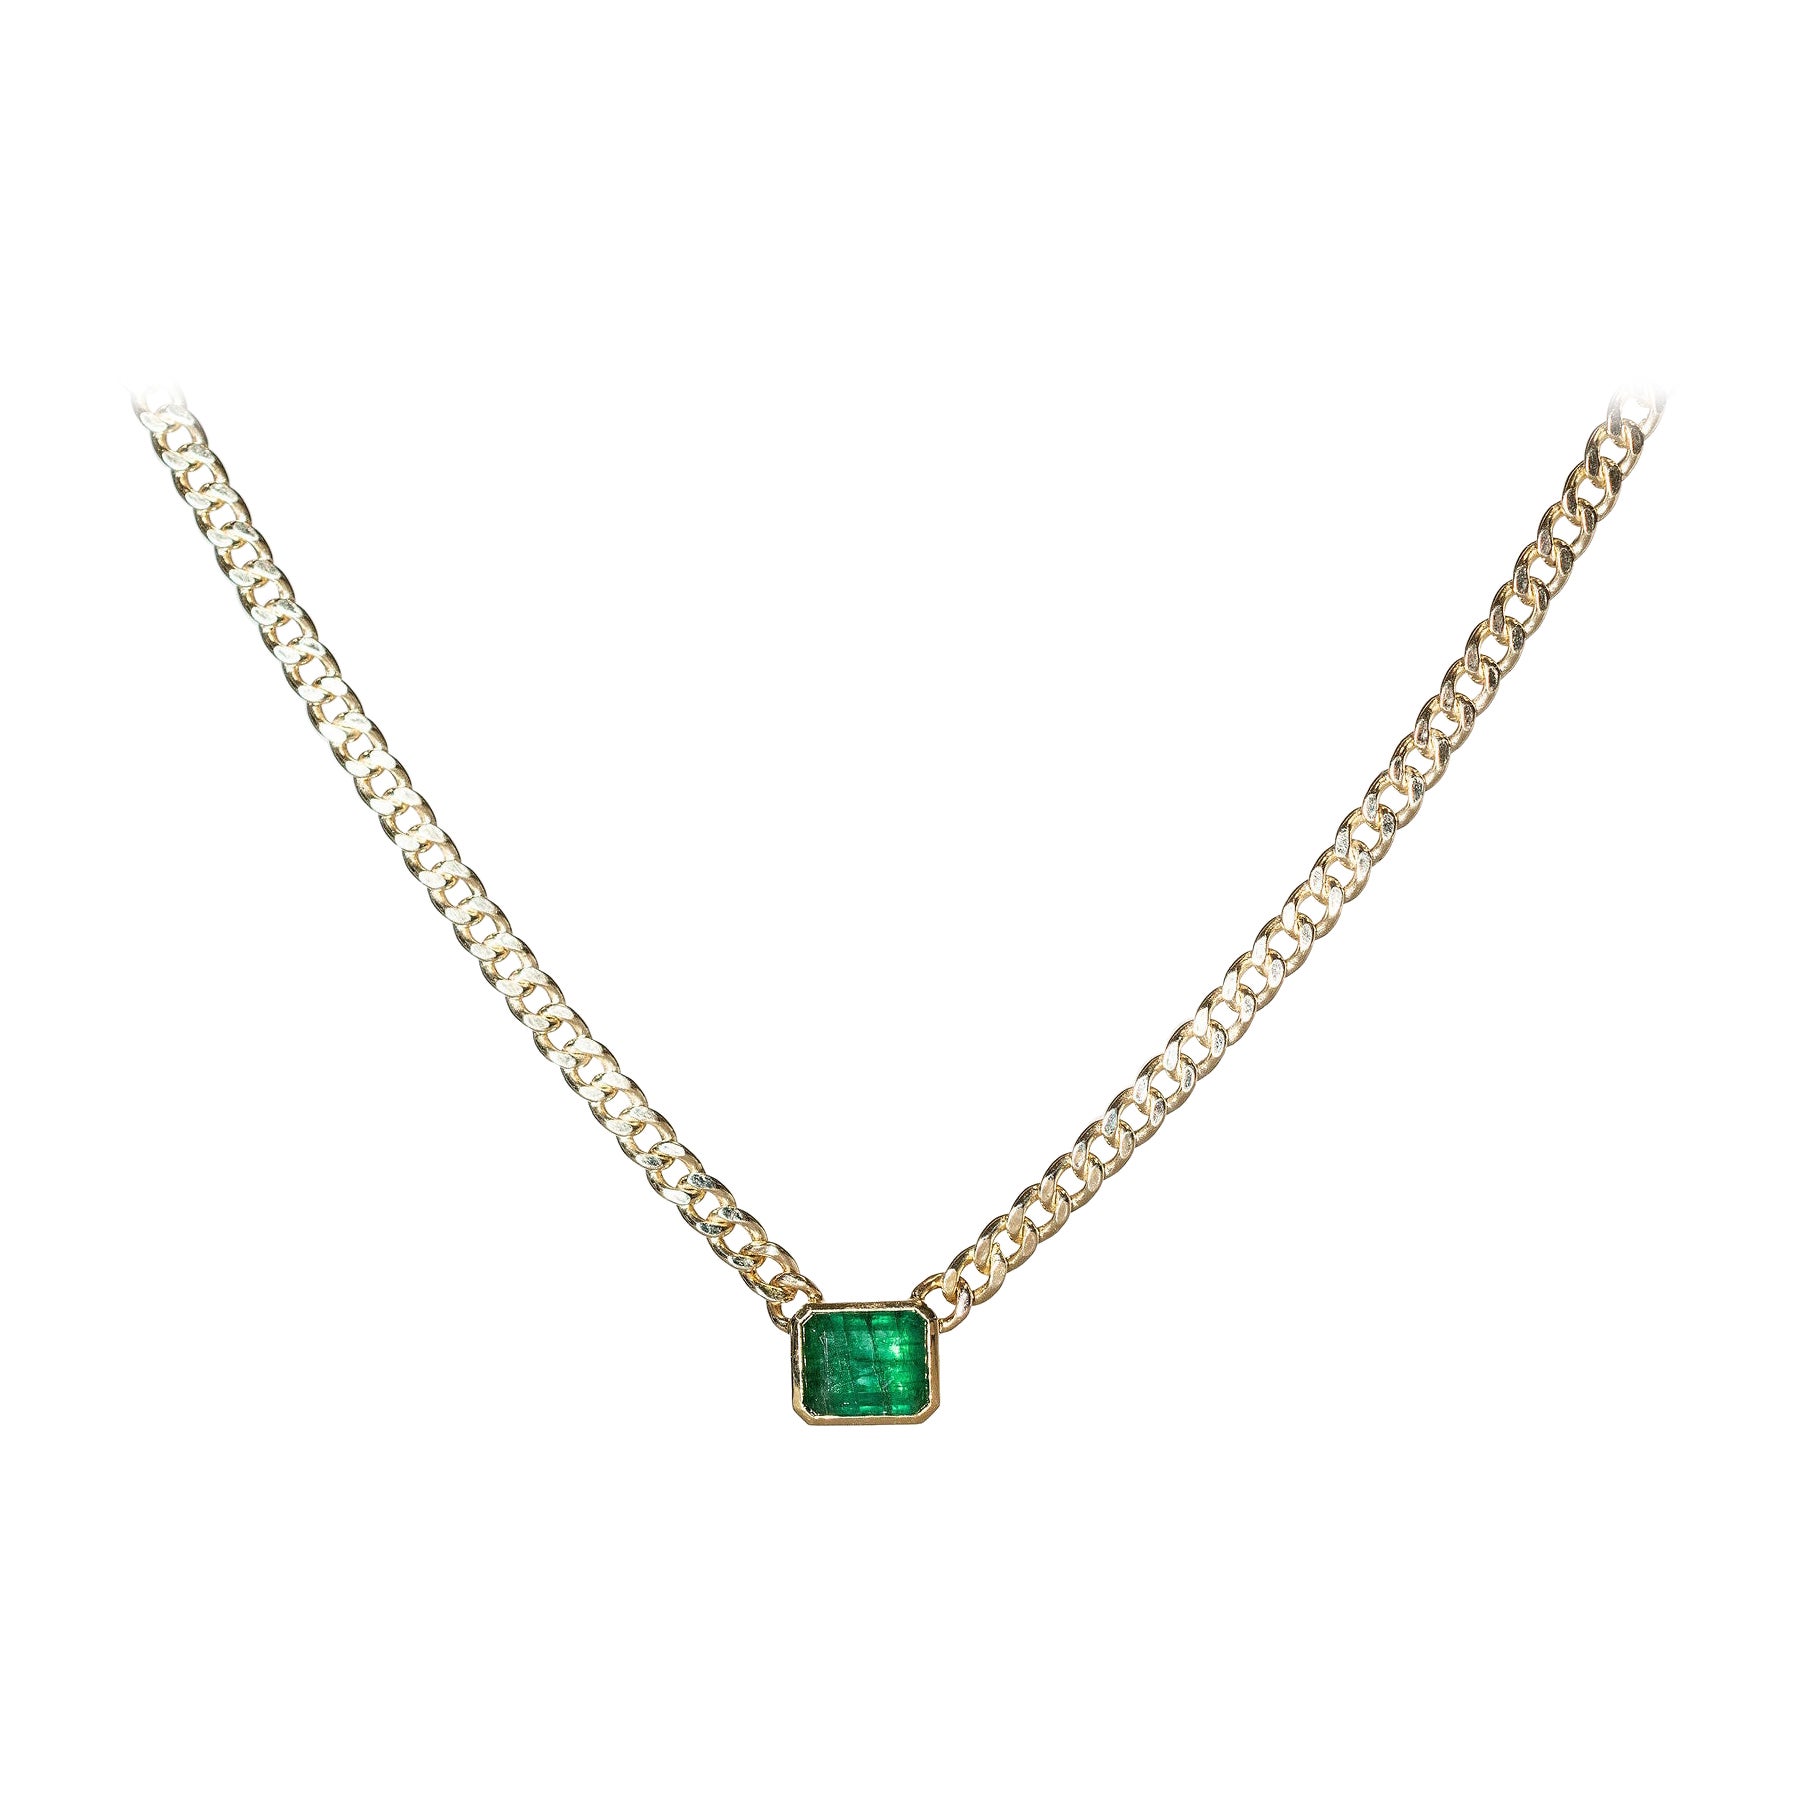 5.5ct Emerald Necklace, 14k Yellow Gold